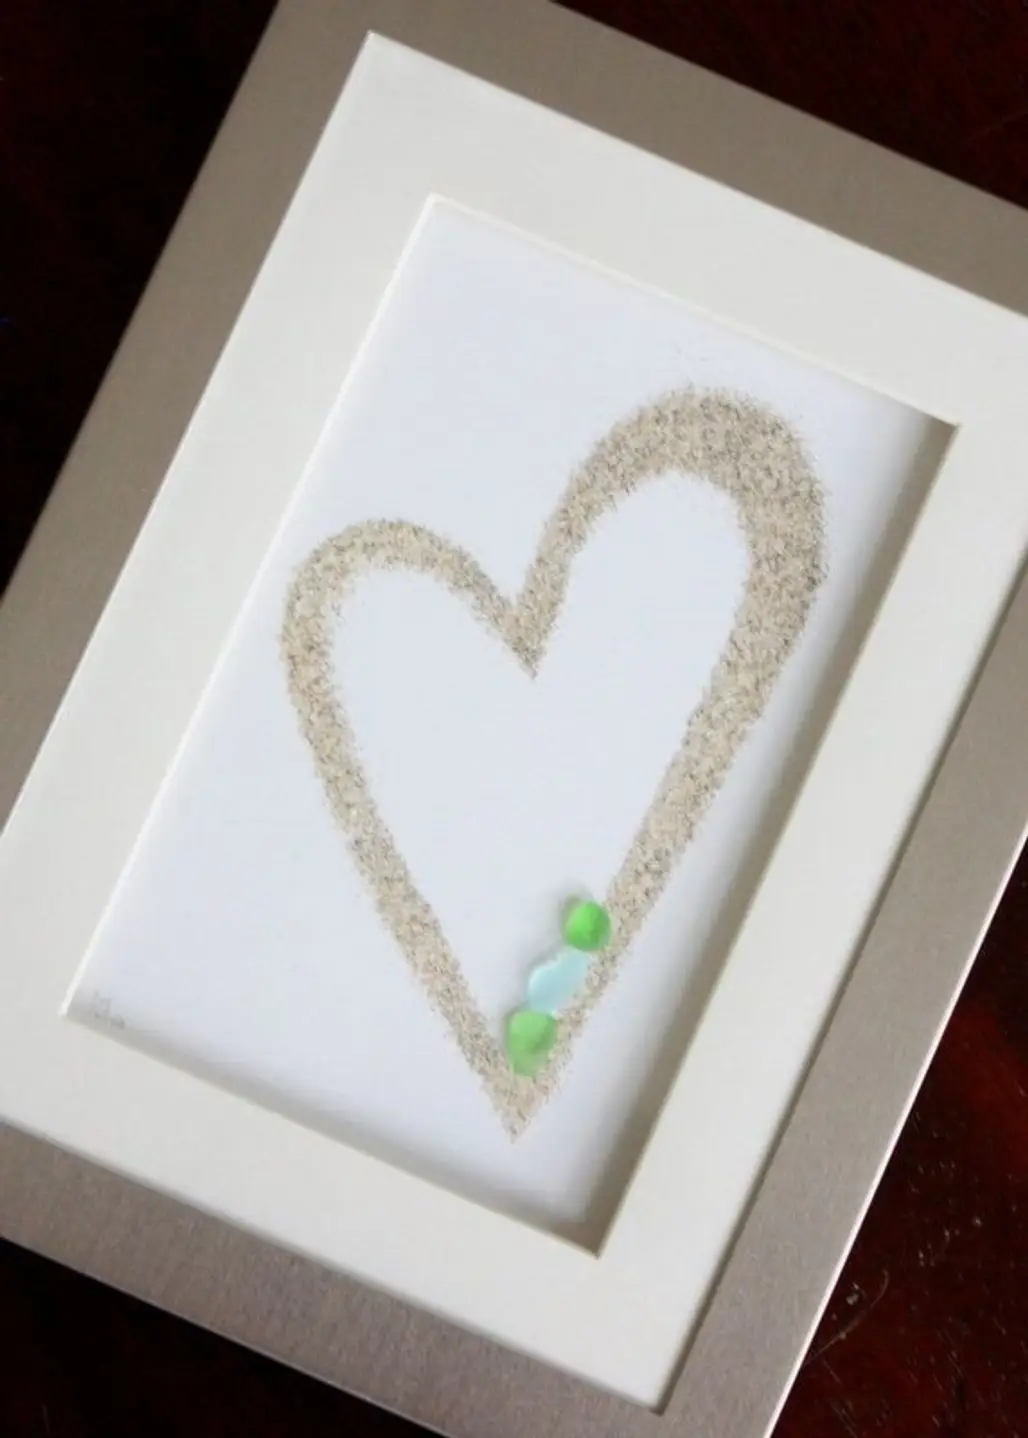 Save Sand from Vacation to Make a Framed Heart with Sea Glass